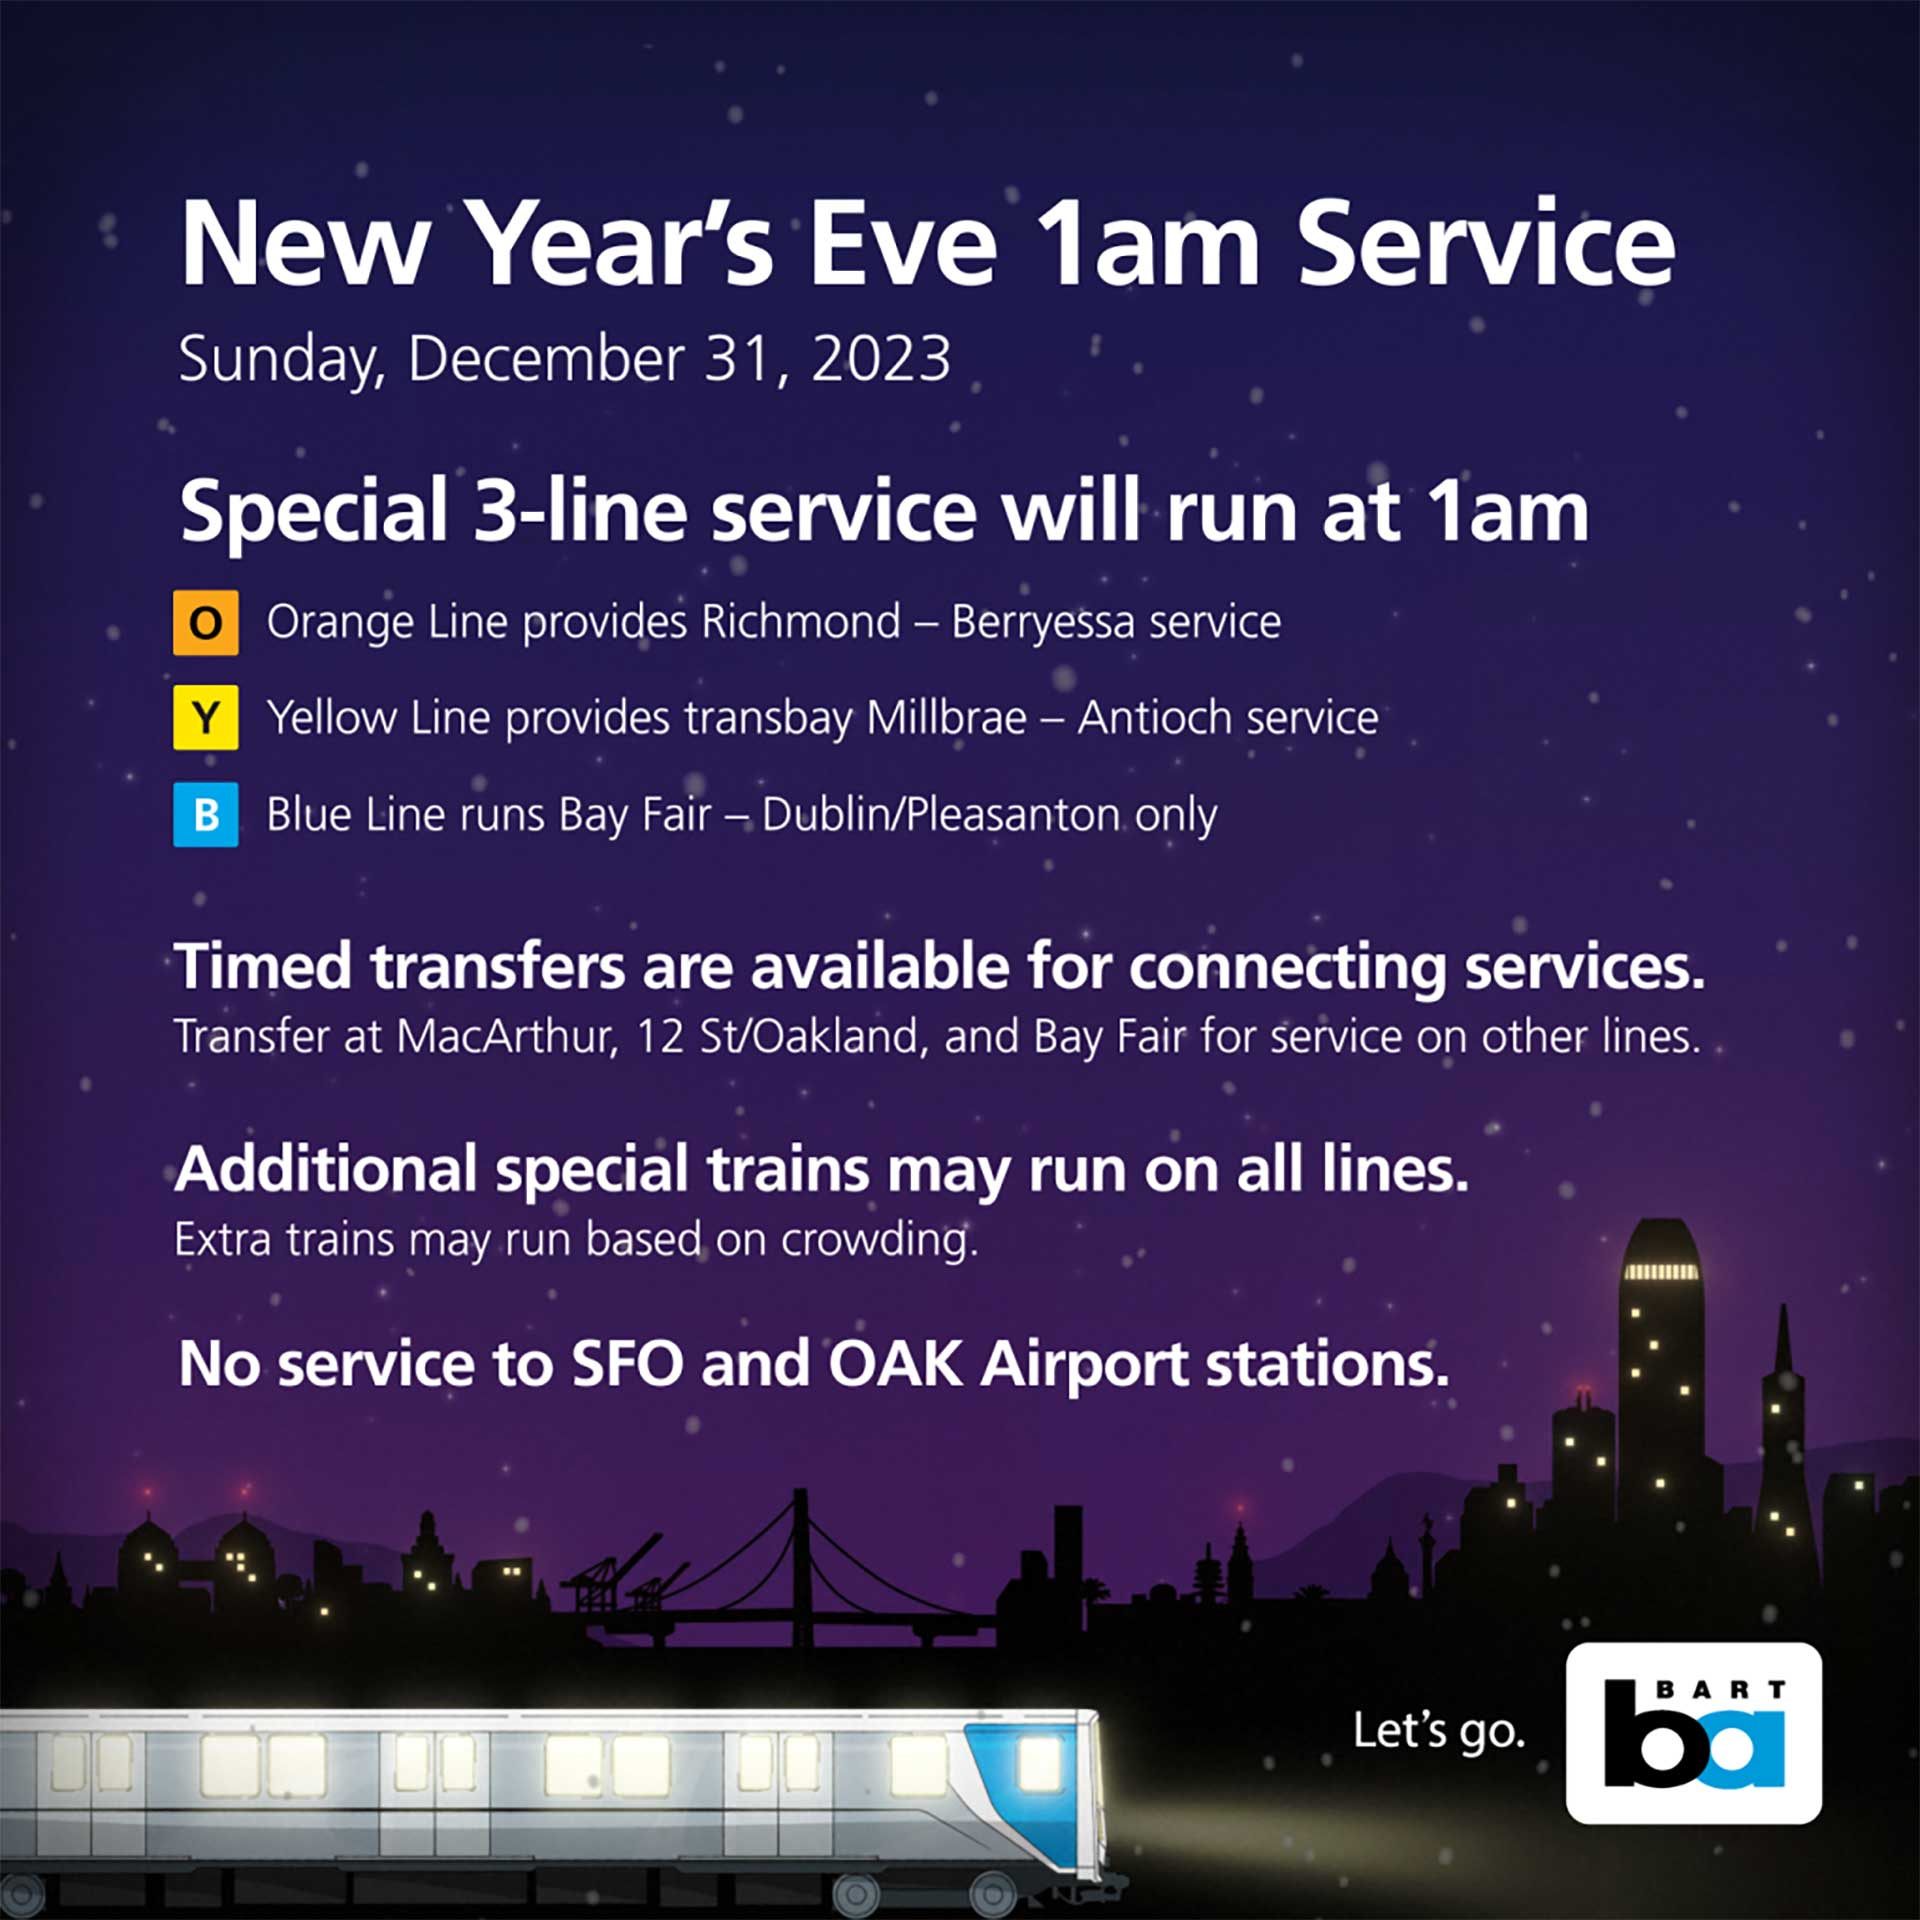 A purple-toned graphic entitled "New Year's Eve 1am Service" with white lettering